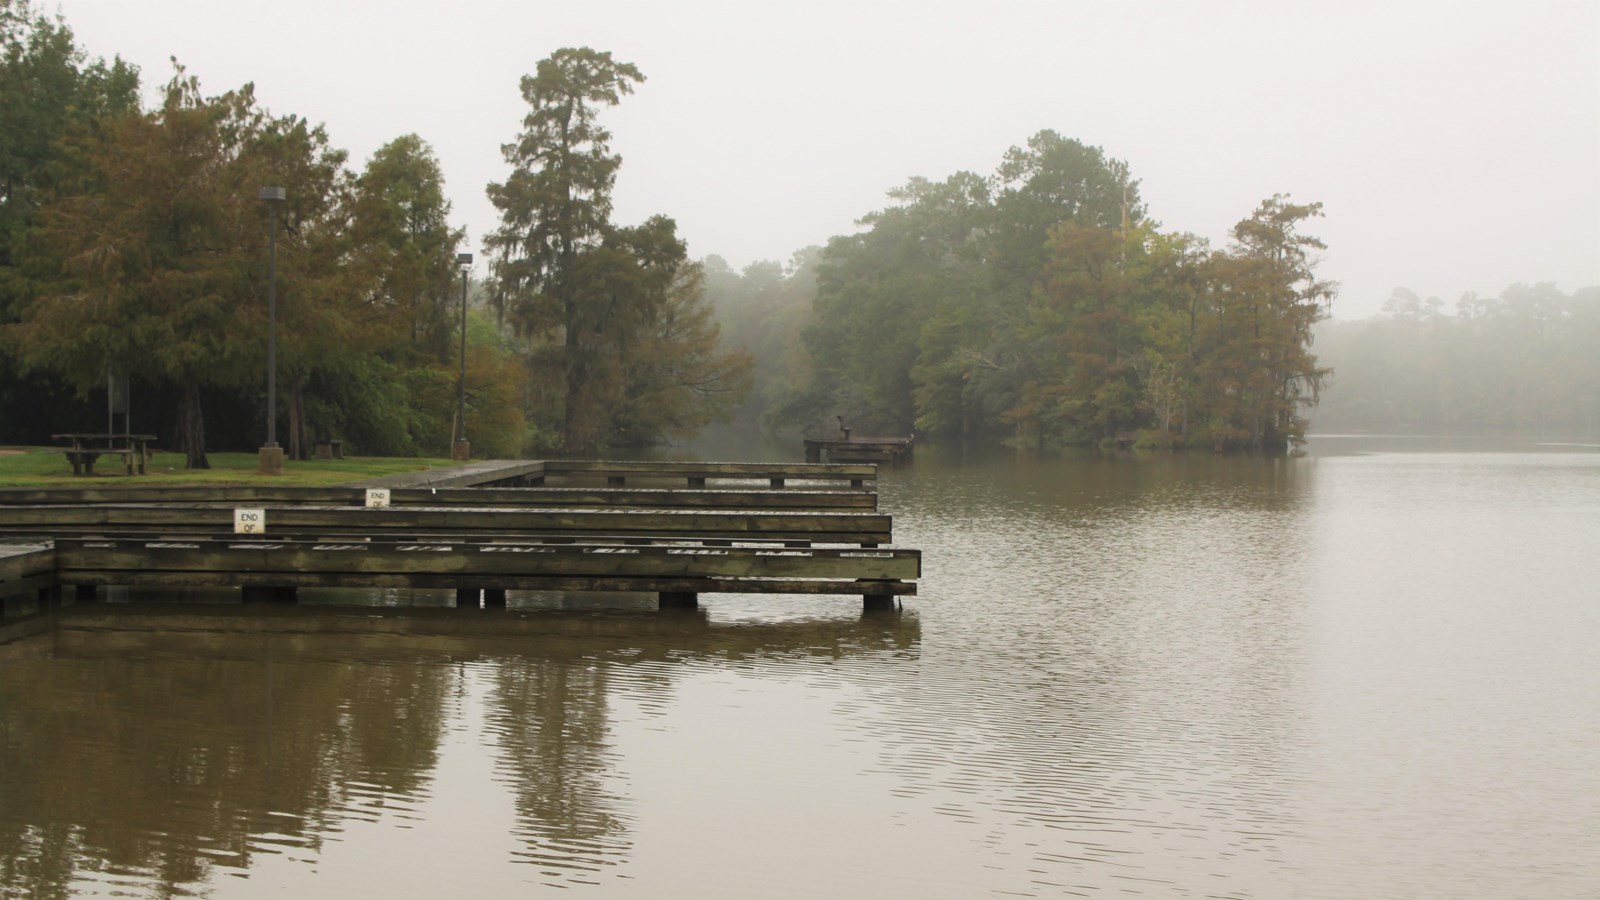 wooden boat dock and pier extending from the riverbank out into the river on a foggy day